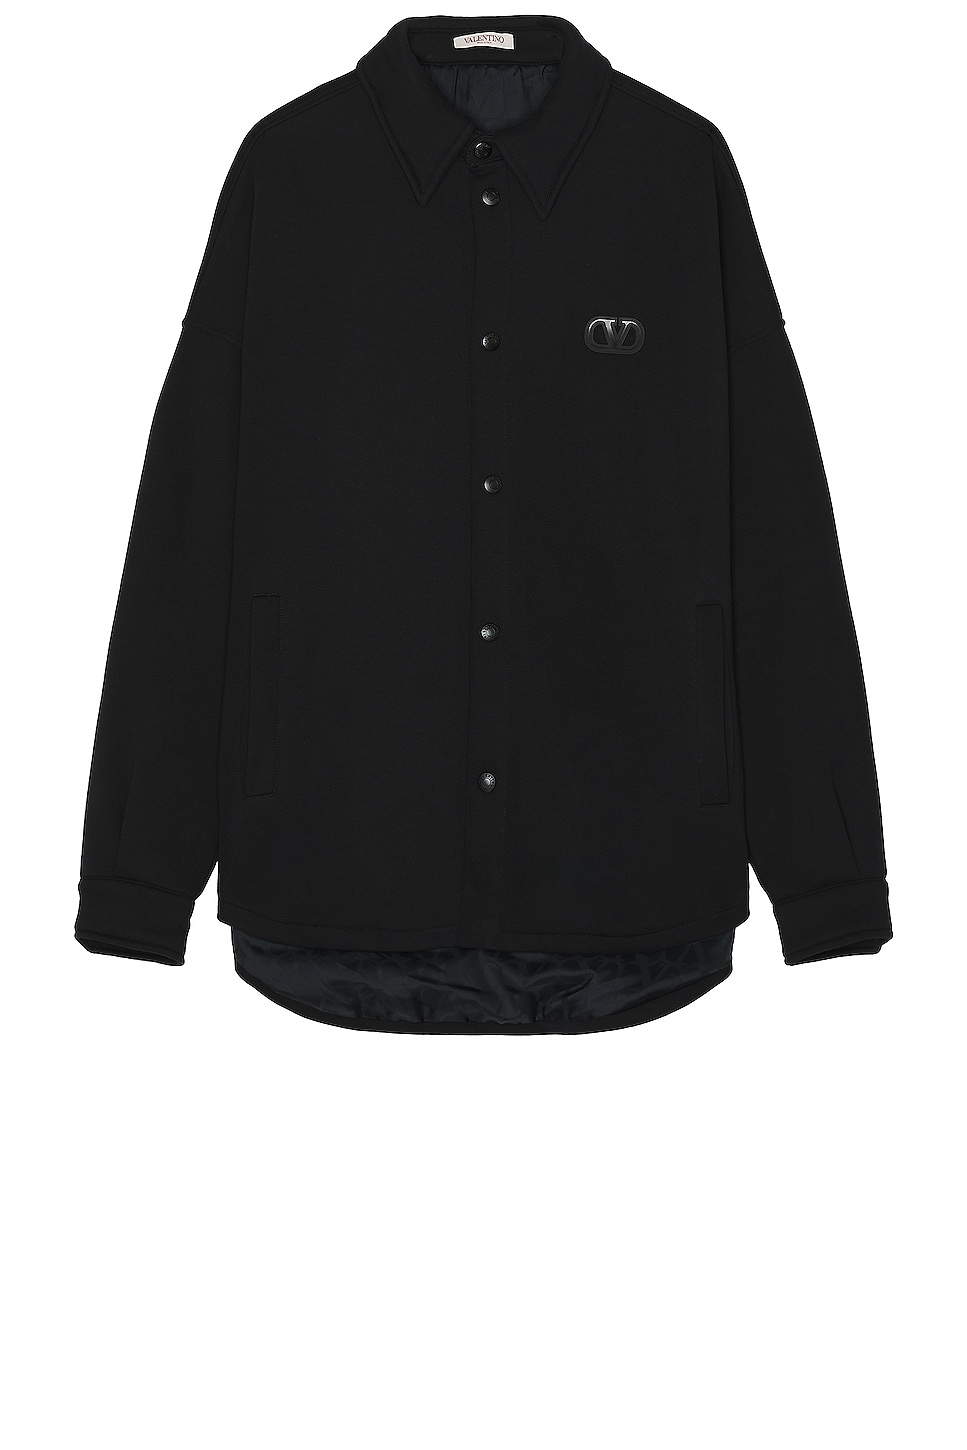 Image 1 of Valentino Button Down Shirt in Black